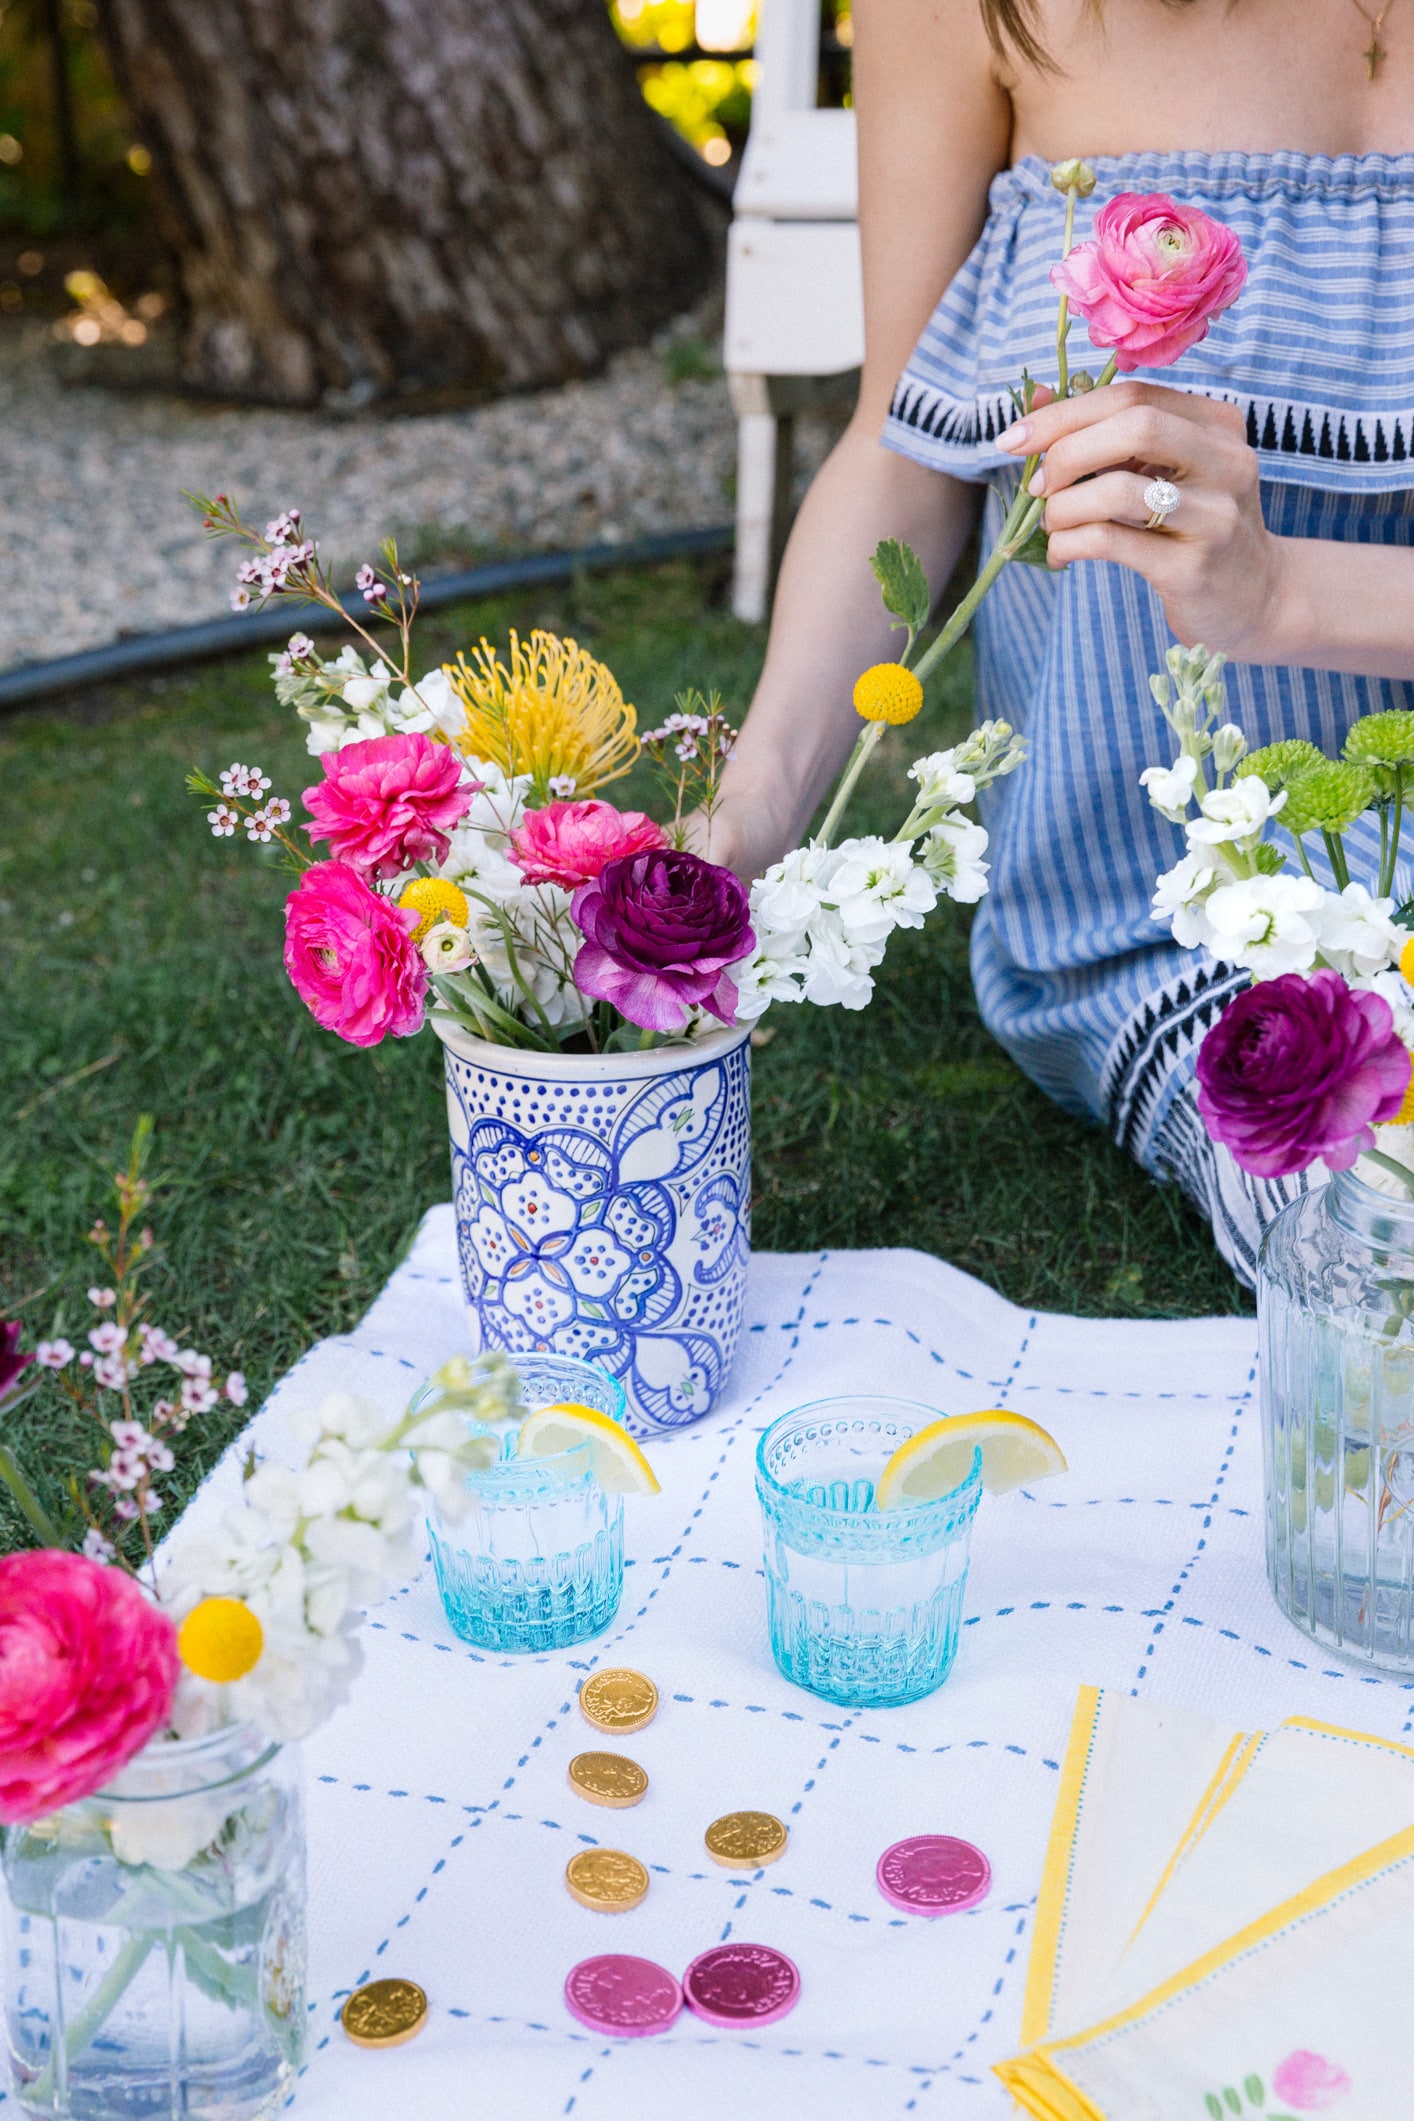 Louise Roe Easter Tea Party With Early Grey Blueberry Muffins And Spring Floral Arrangements